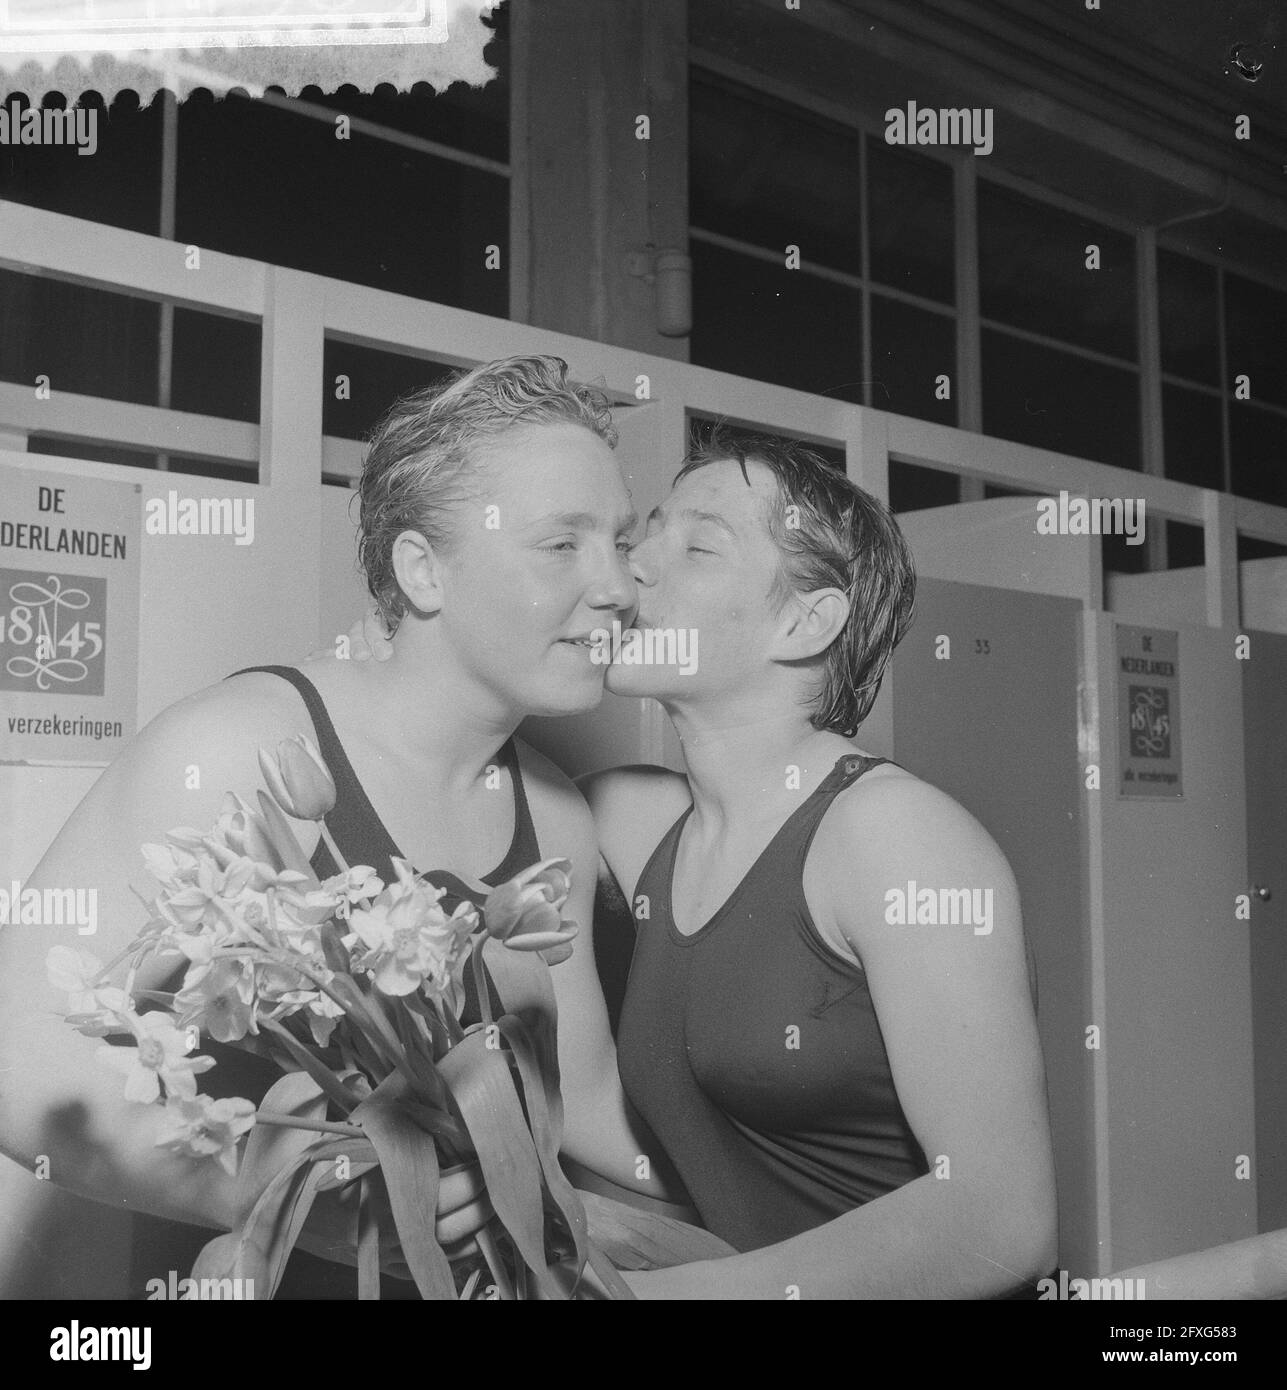 Improvement of Dutch swimming records in the swimming pool Naarden, Tineke Lagerberg (l) is congratulated by W. Lambour, March 31, 1960, swimming records, The Netherlands, 20th century press agency photo, news to remember, documentary, historic photography 1945-1990, visual stories, human history of the Twentieth Century, capturing moments in time Stock Photo